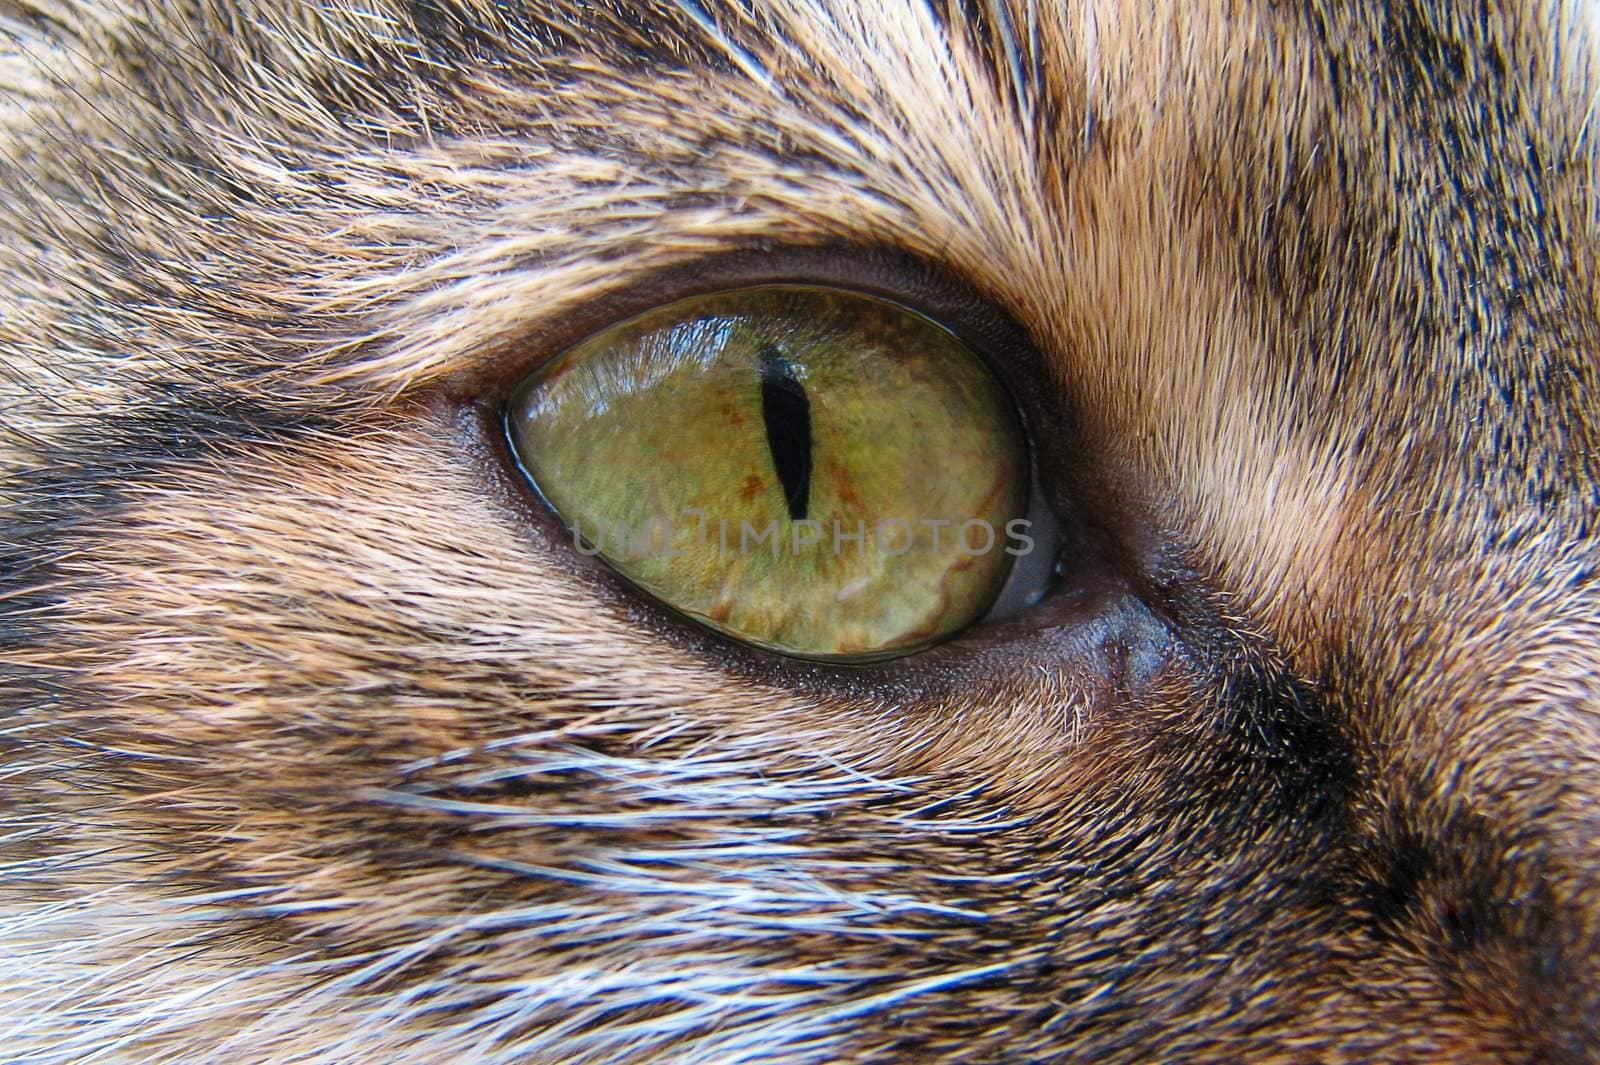 The close-up photo of a cat's eye